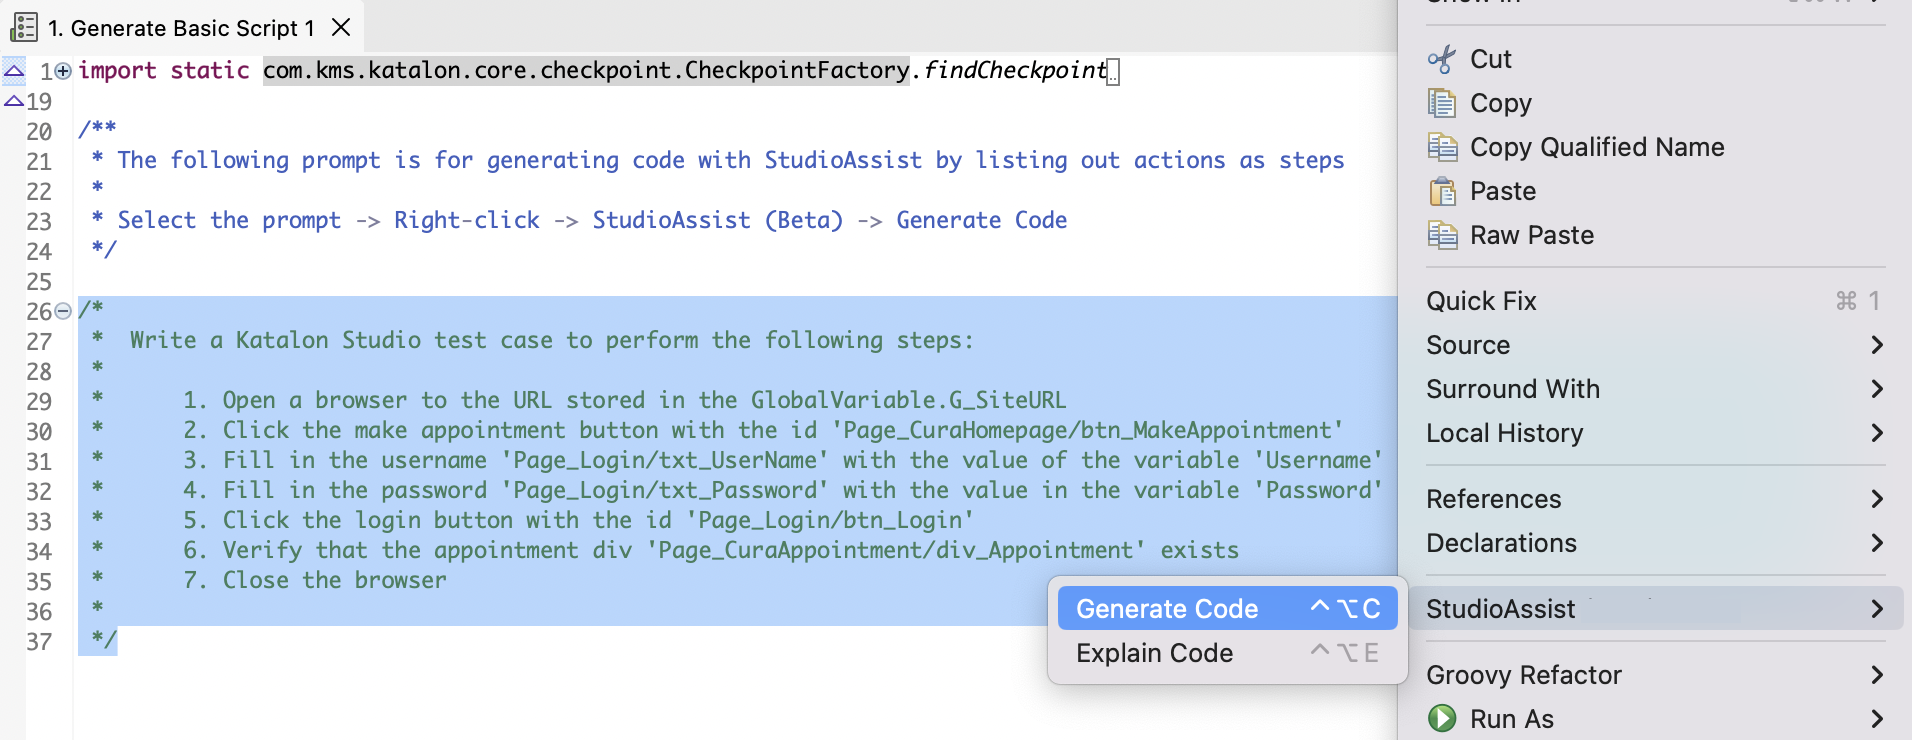 Generate code from selected prompt of the test case